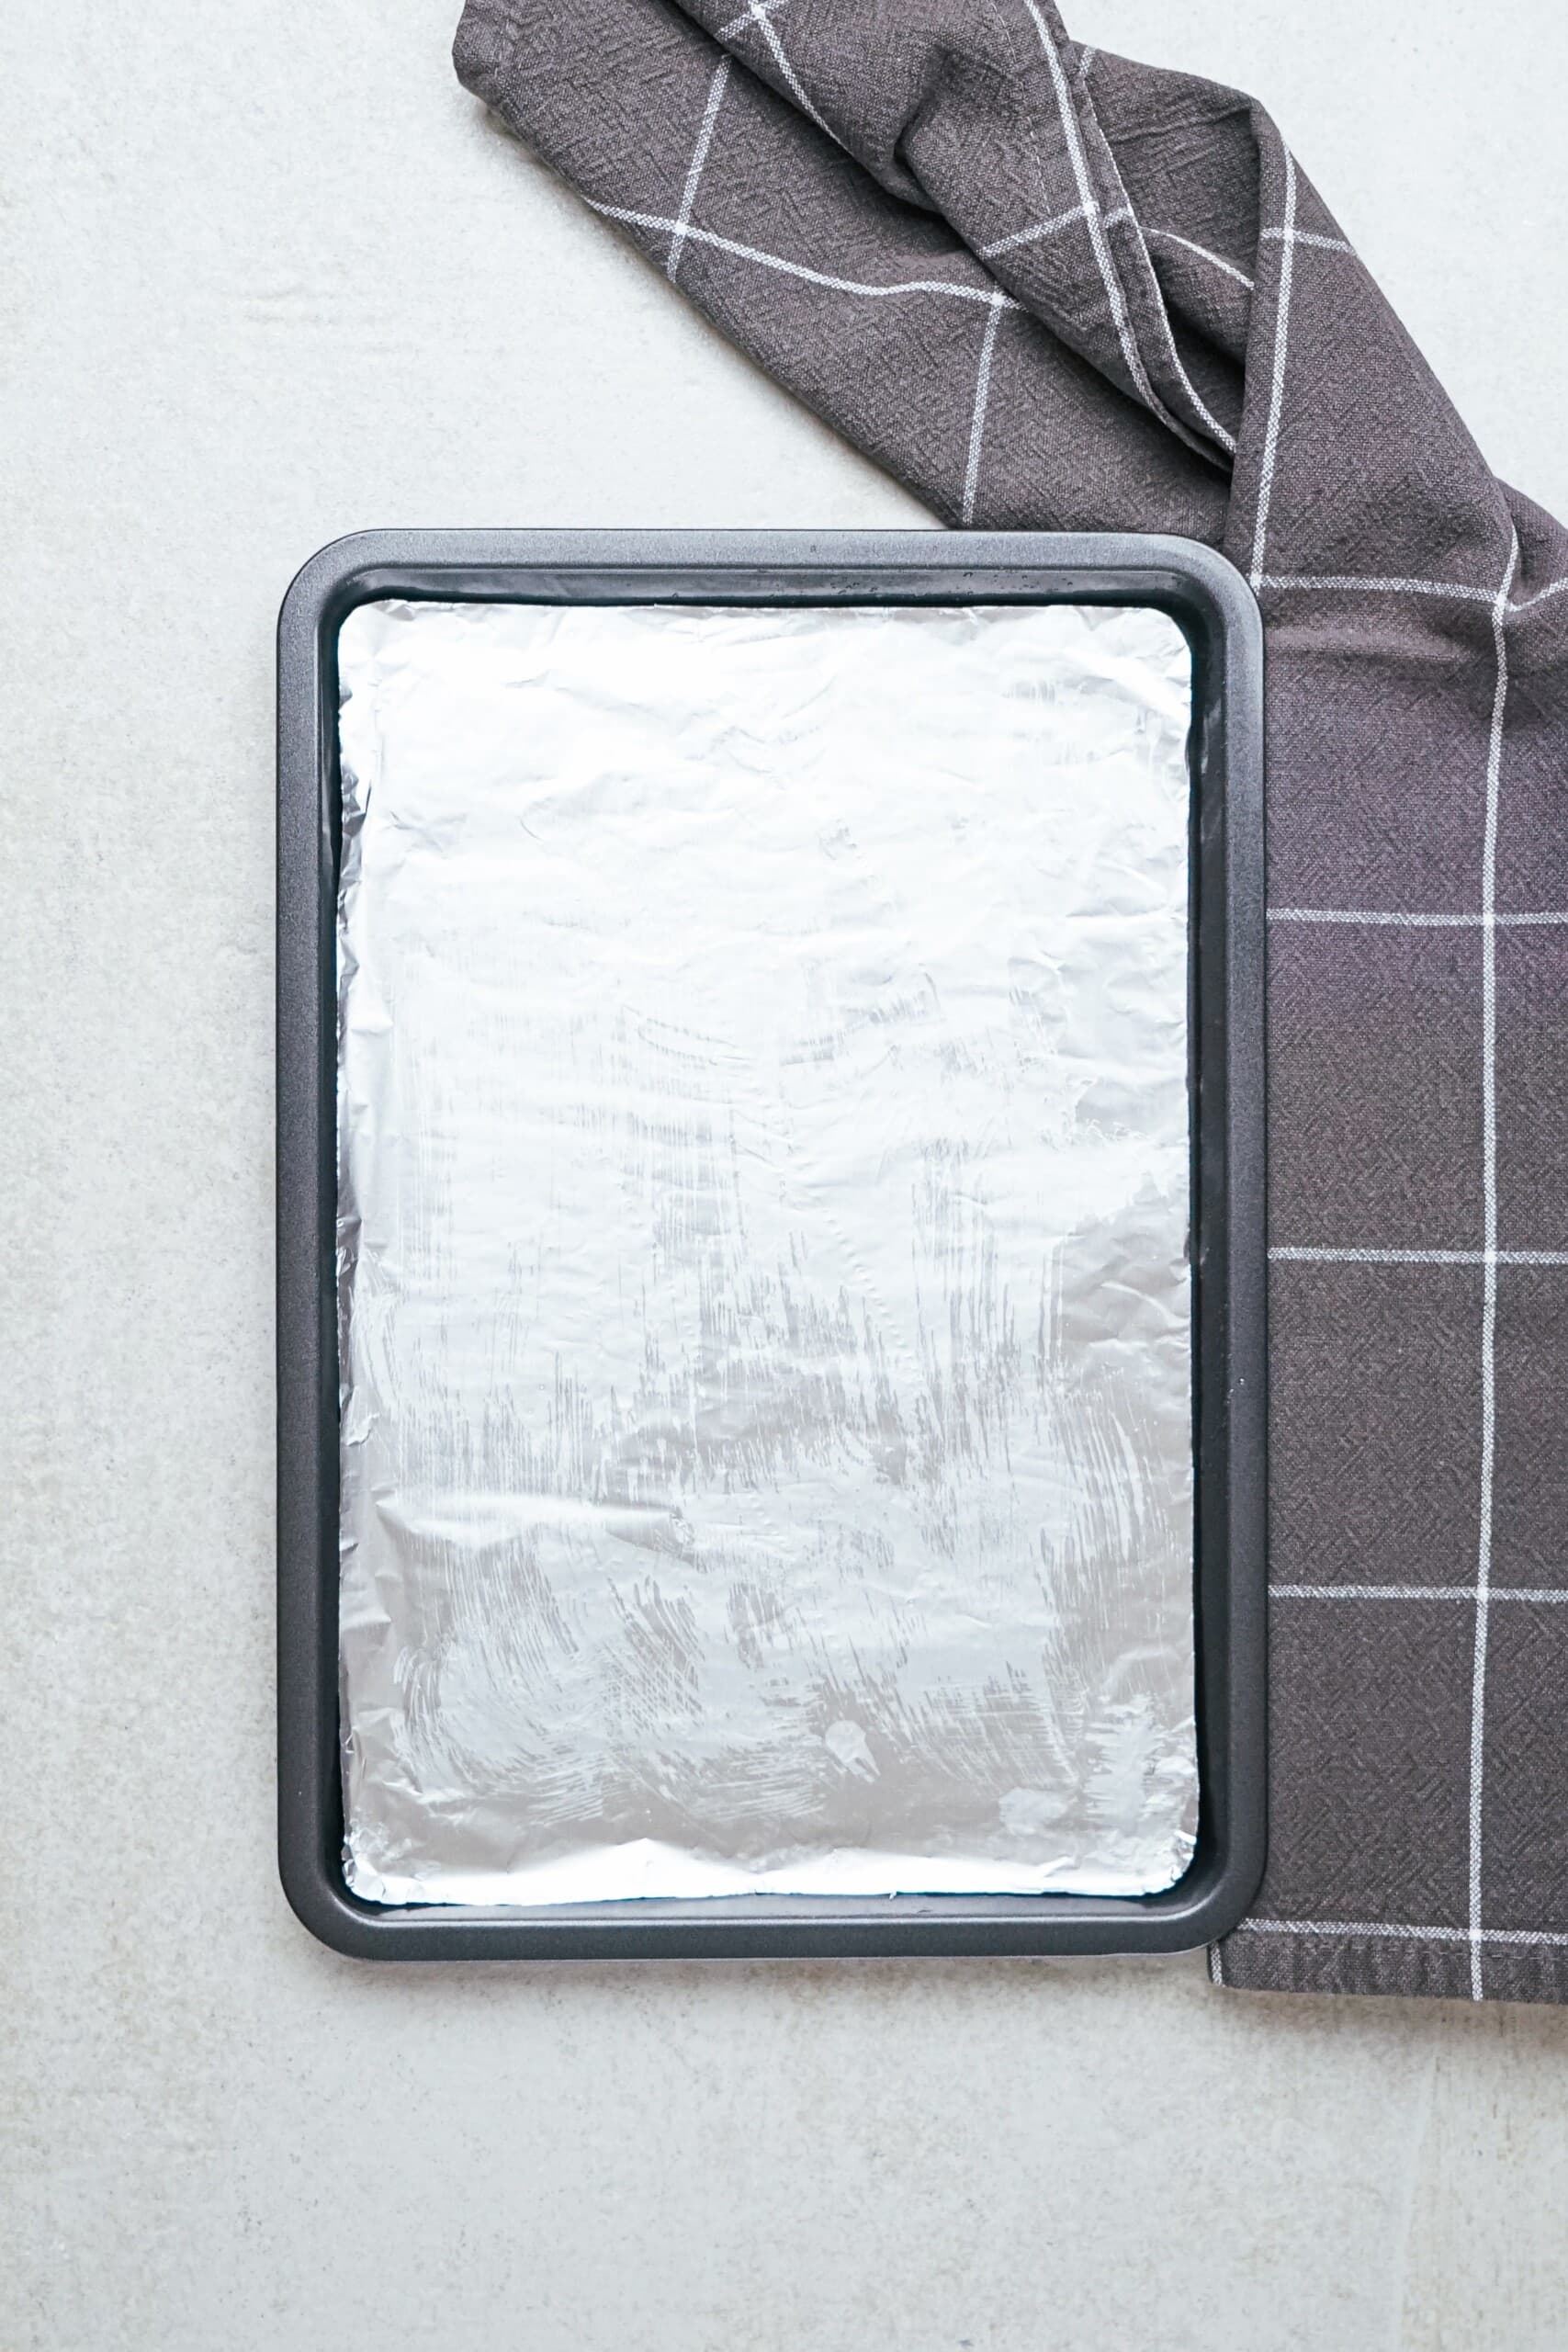 baking sheet lined with foil 